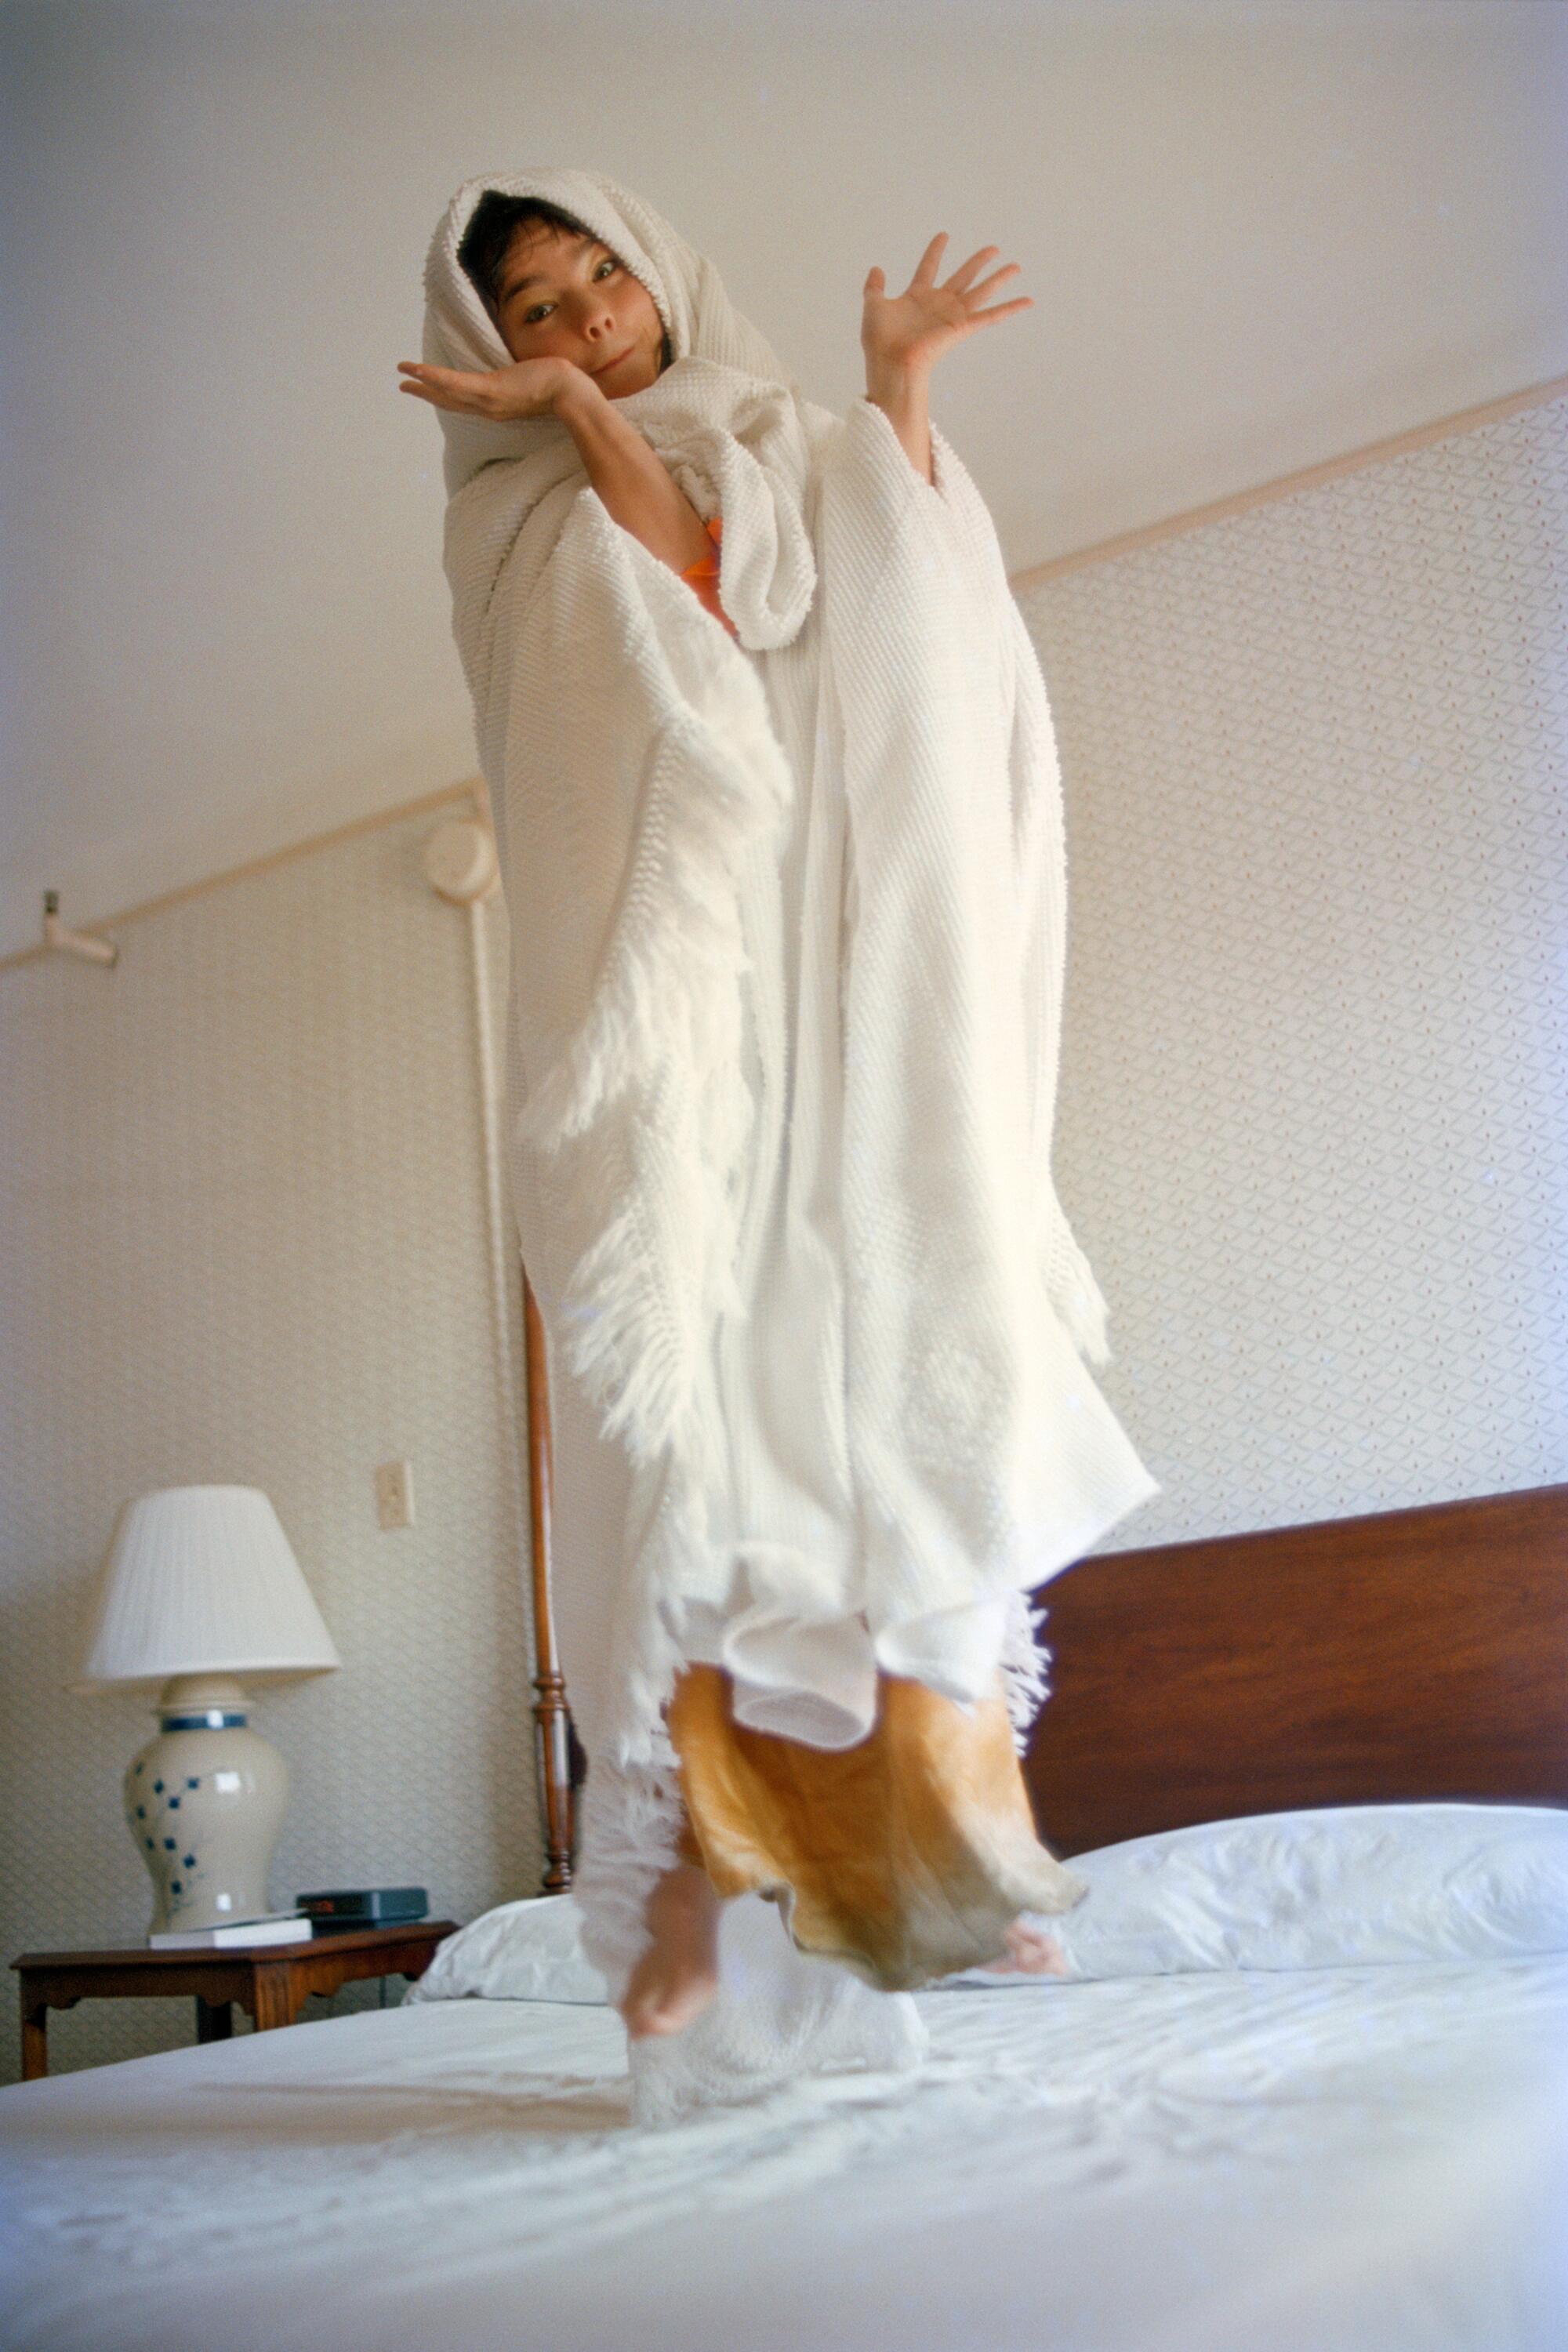 Björk jumps on a bed, wrapped in a white sheet, making a playful face.